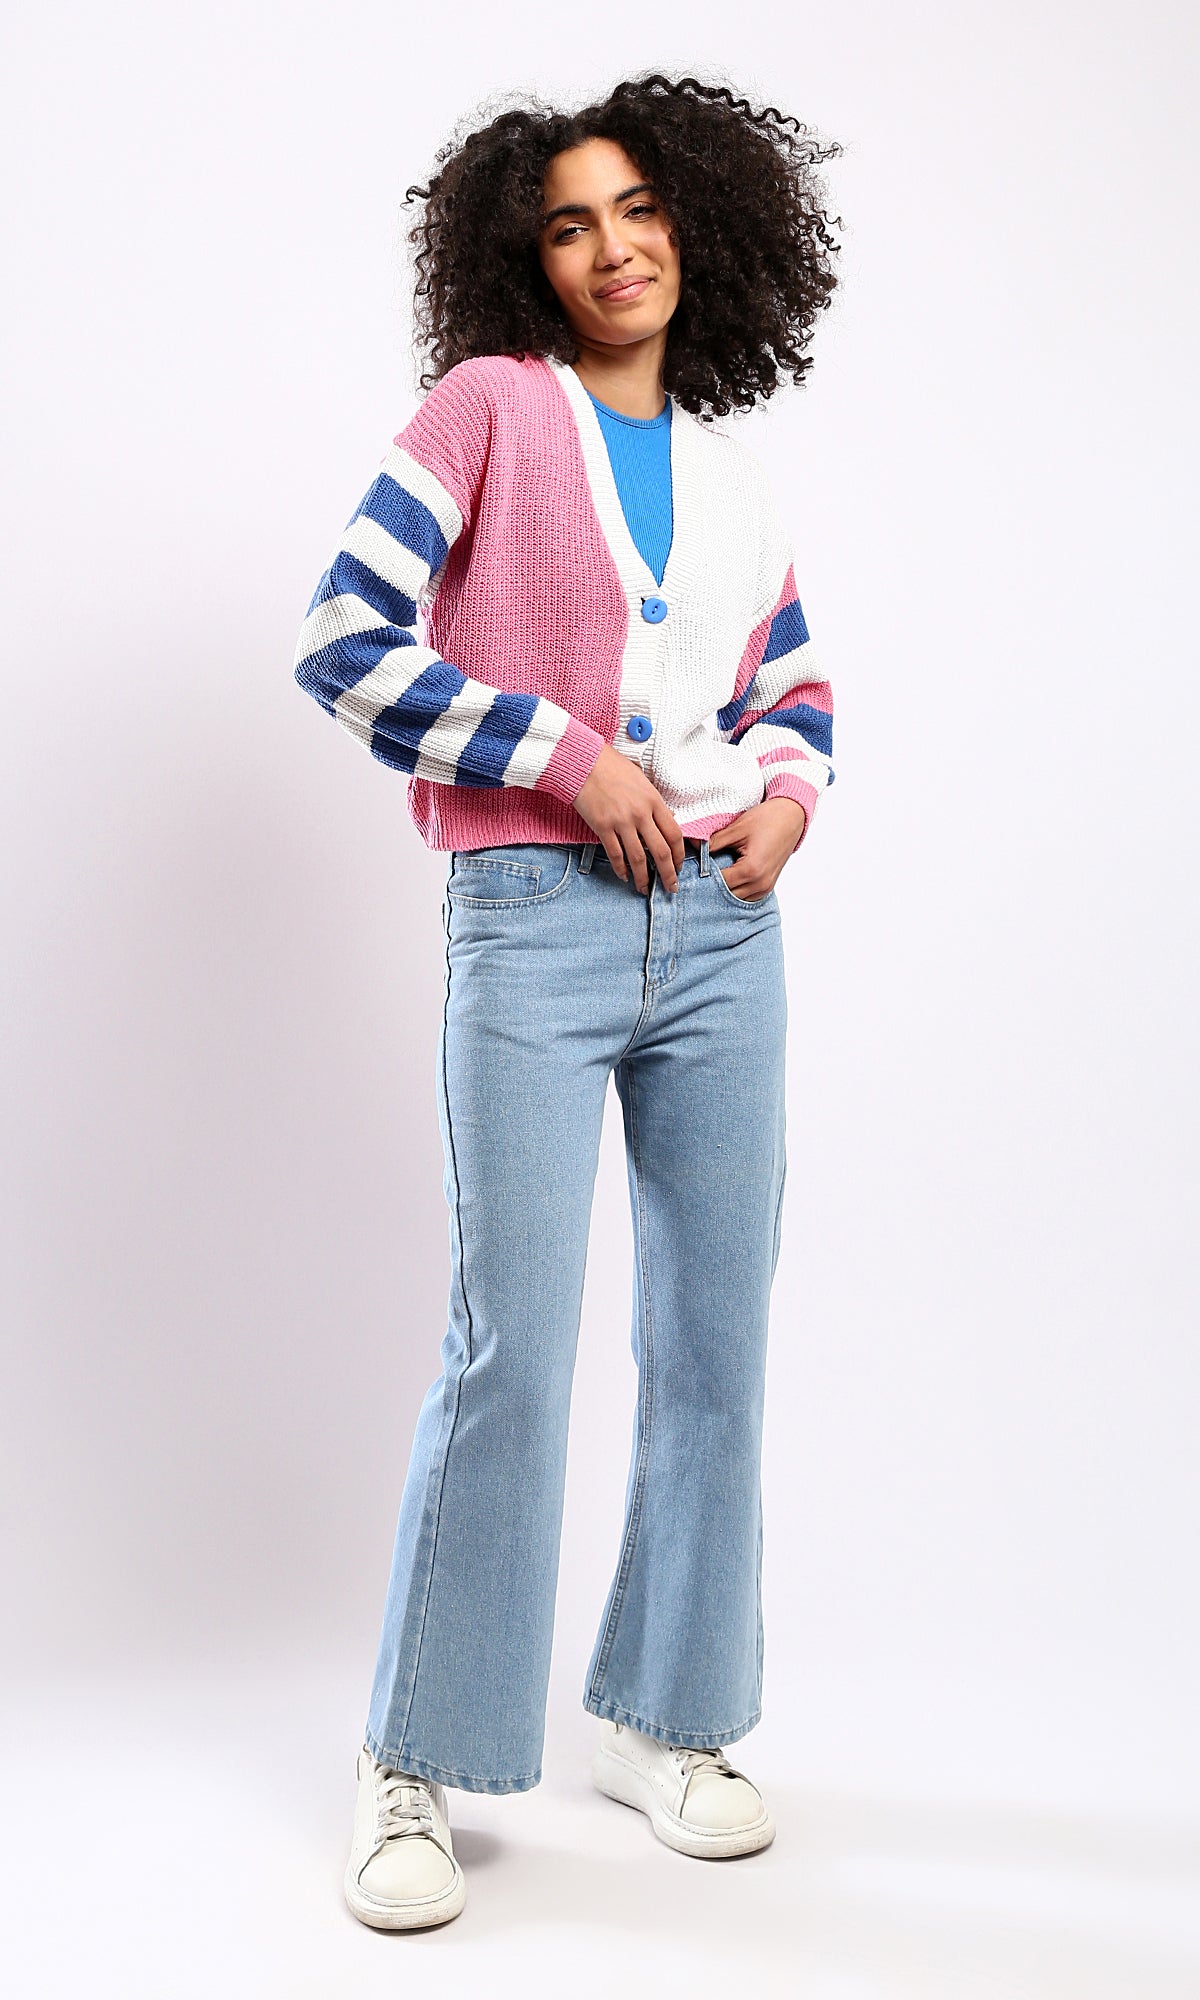 O173661 Knitted Short Cardigan With Striped Sleeves - Navy Blue & Pink